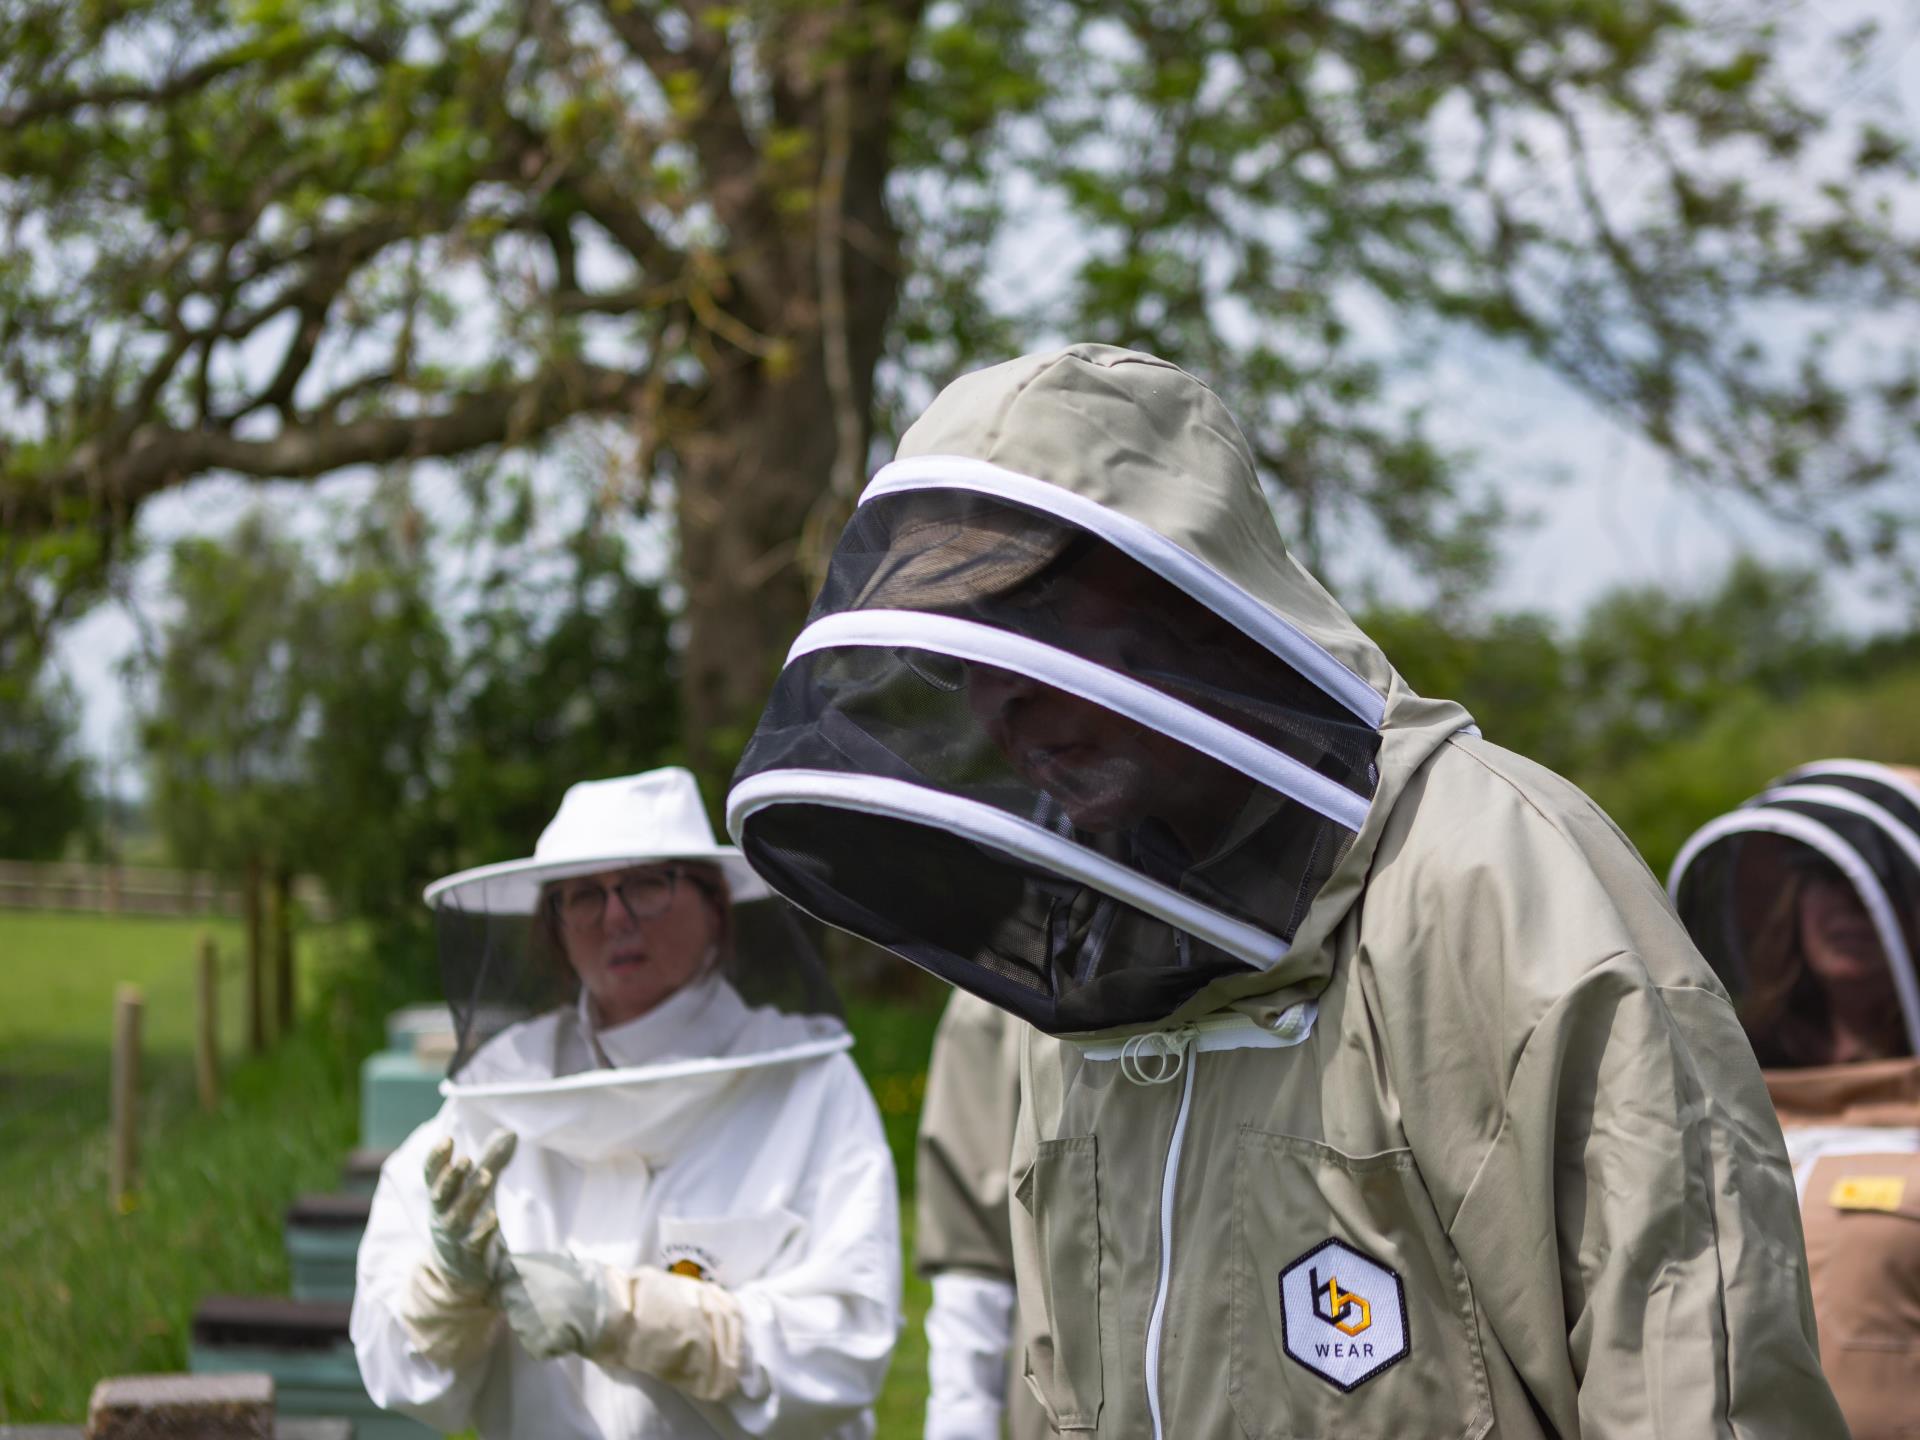 dressed up ready for a beekeeping experience